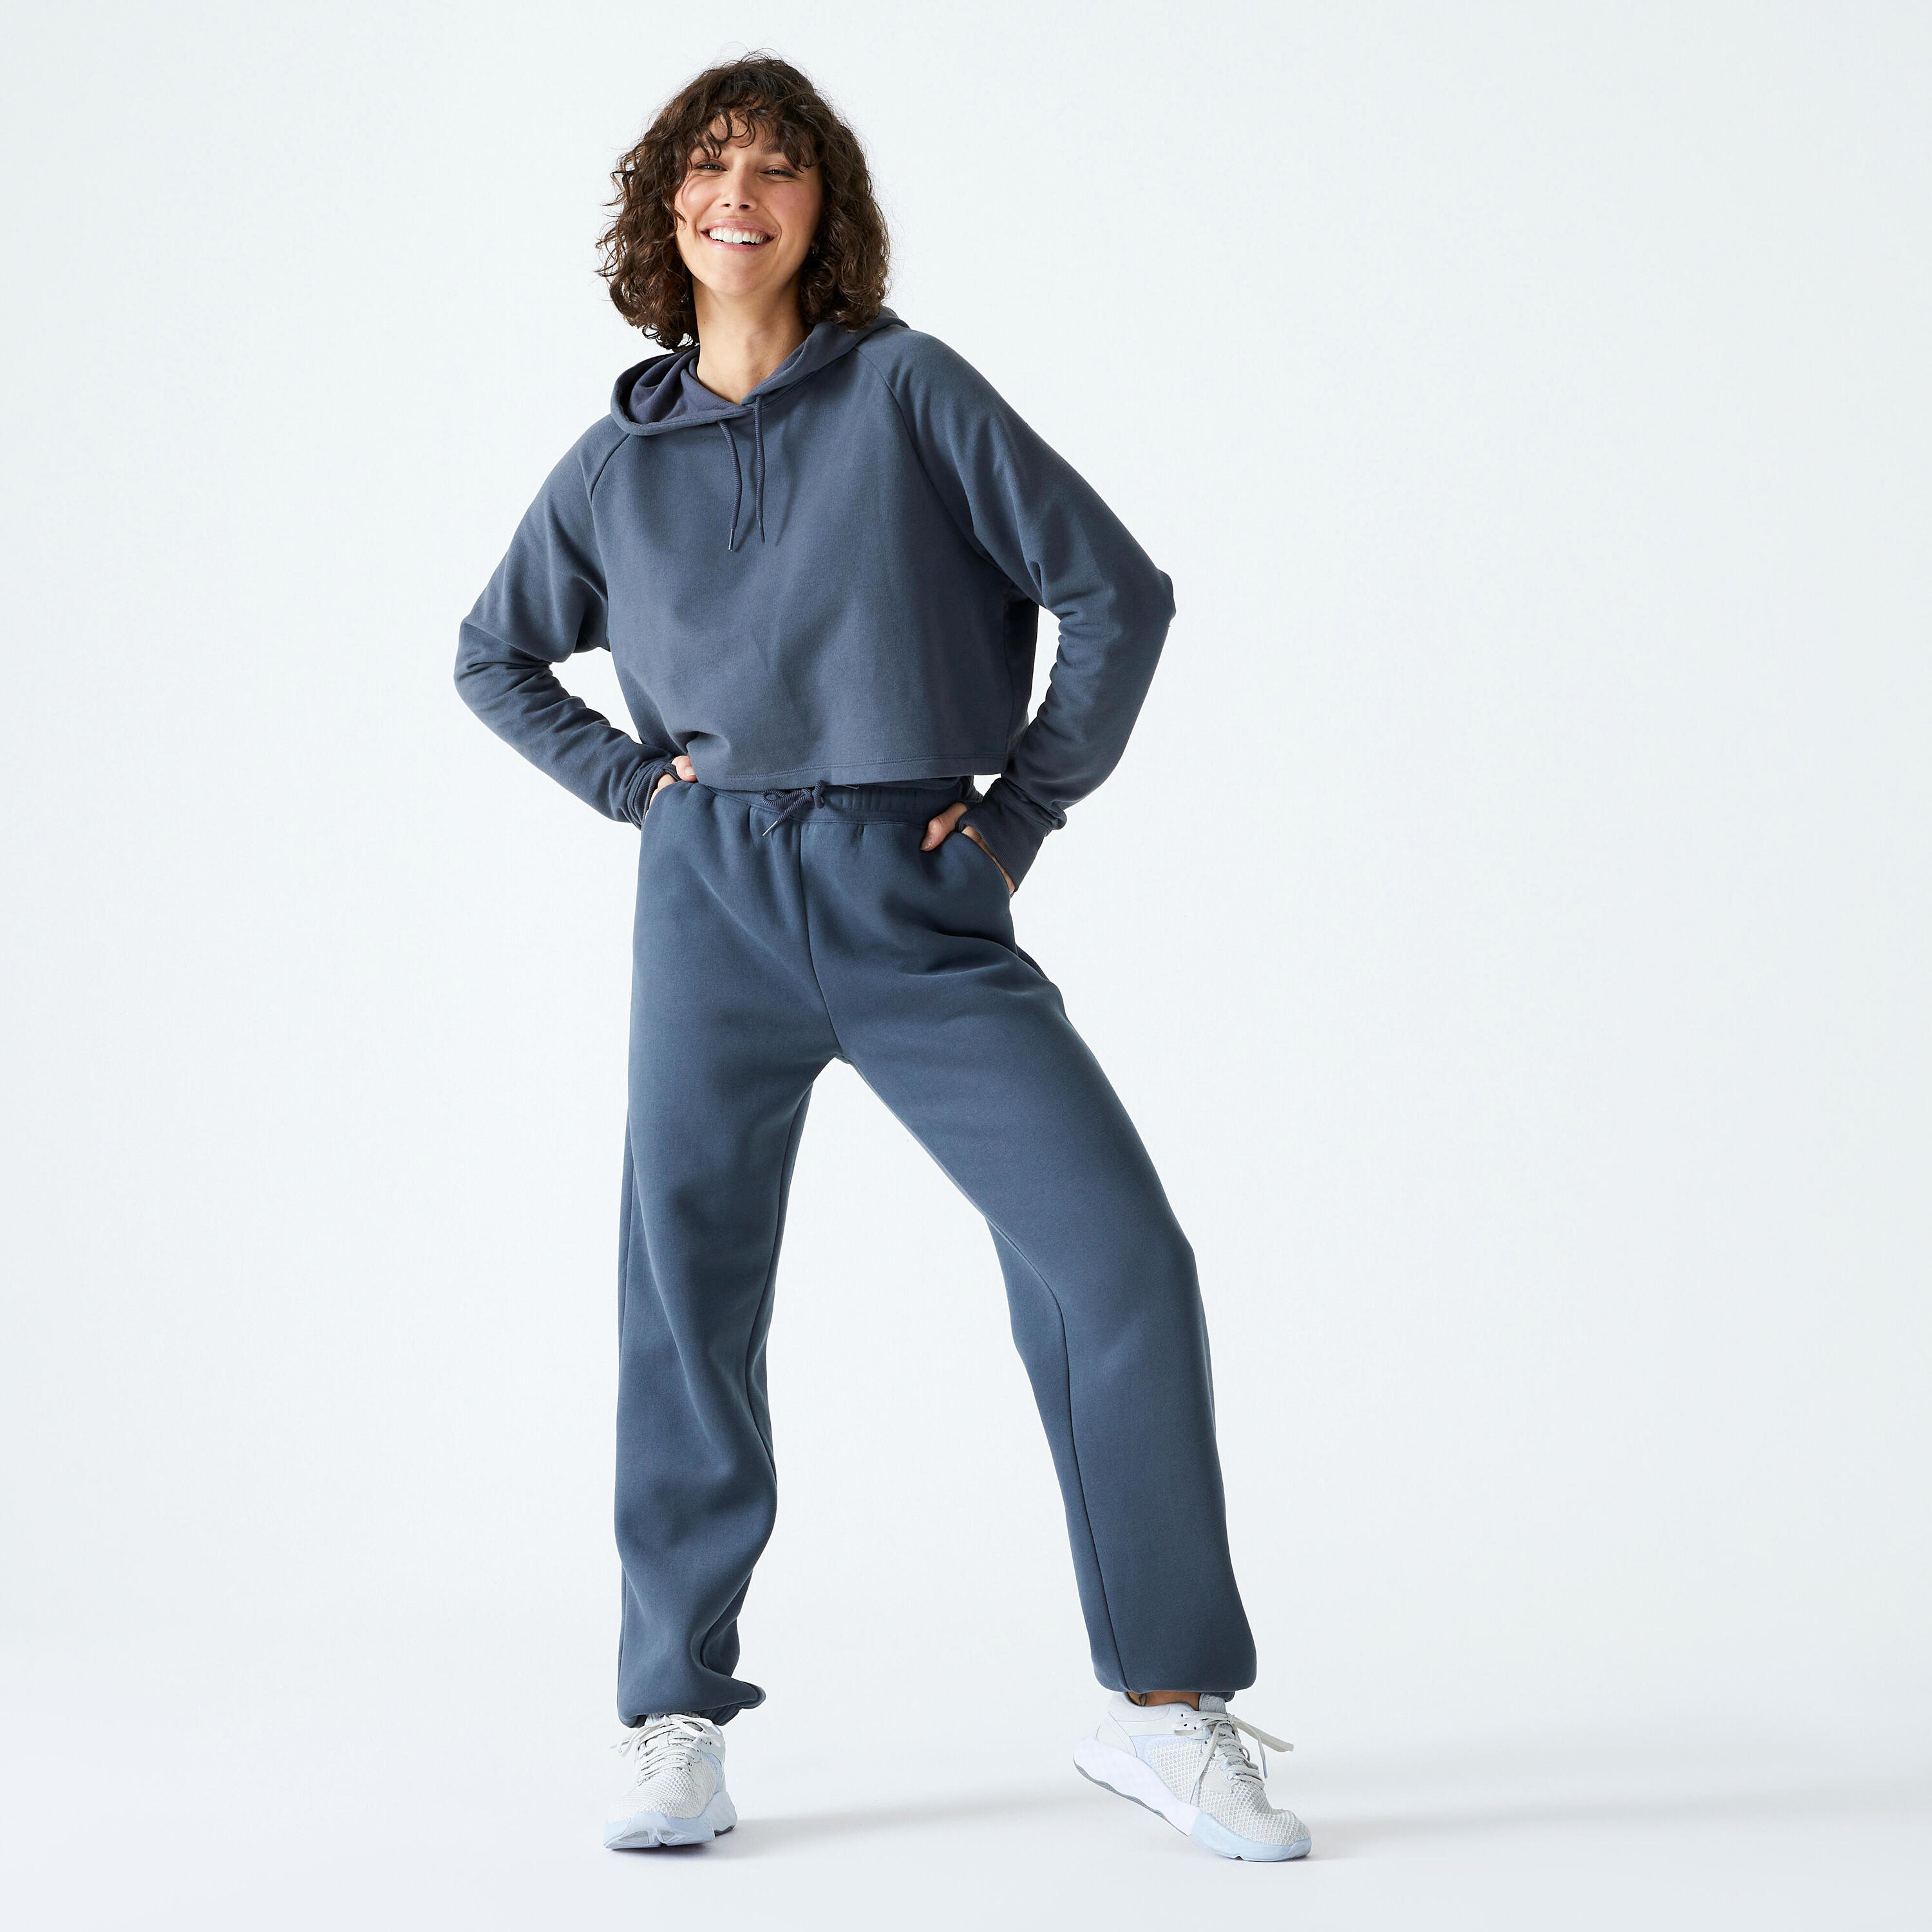 Women's Loose-Fit Fitness Jogging Bottoms 520 - Abyss Grey 2/6